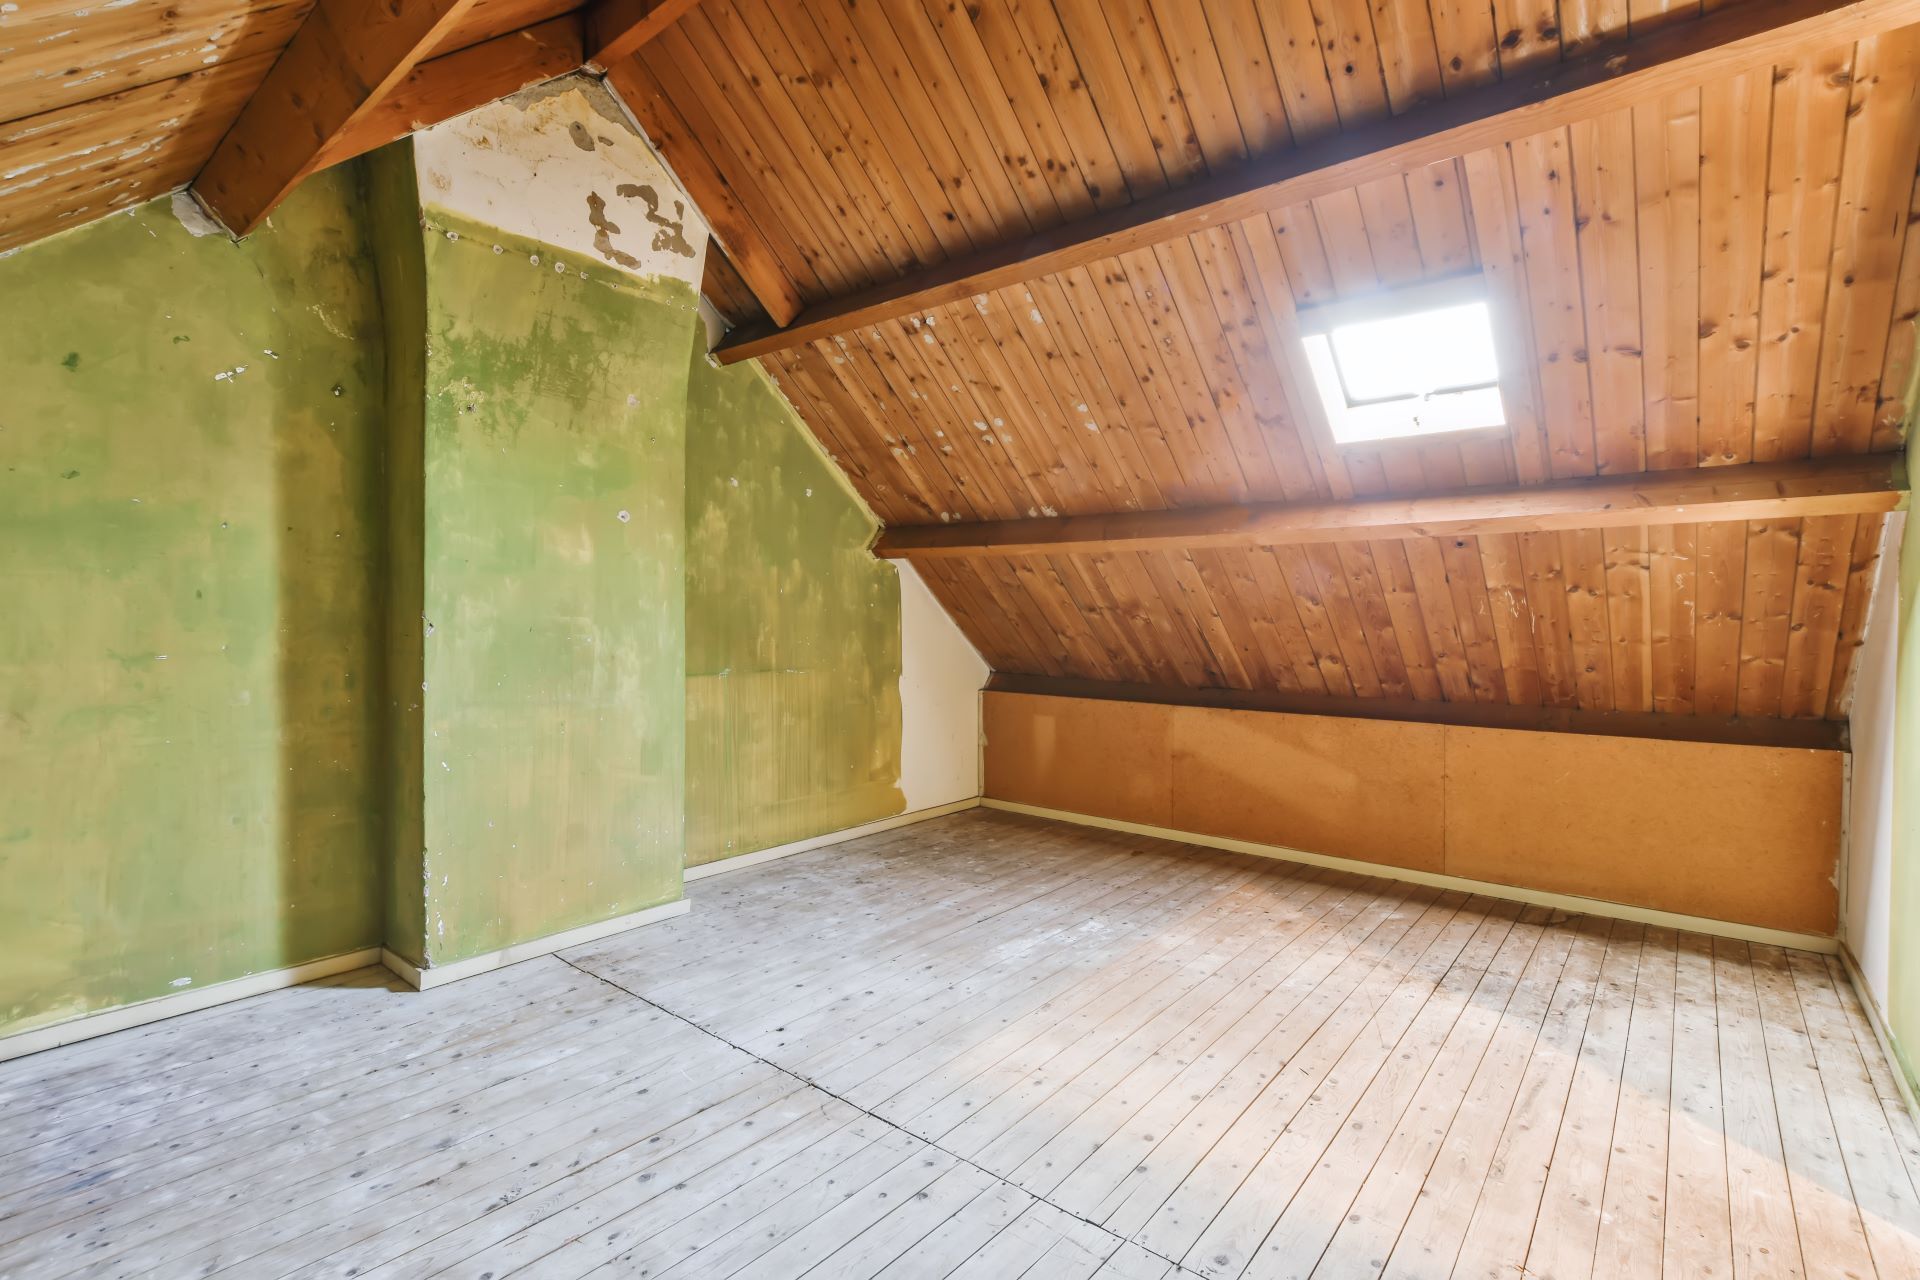 An empty attic with a wooden ceiling and a window.